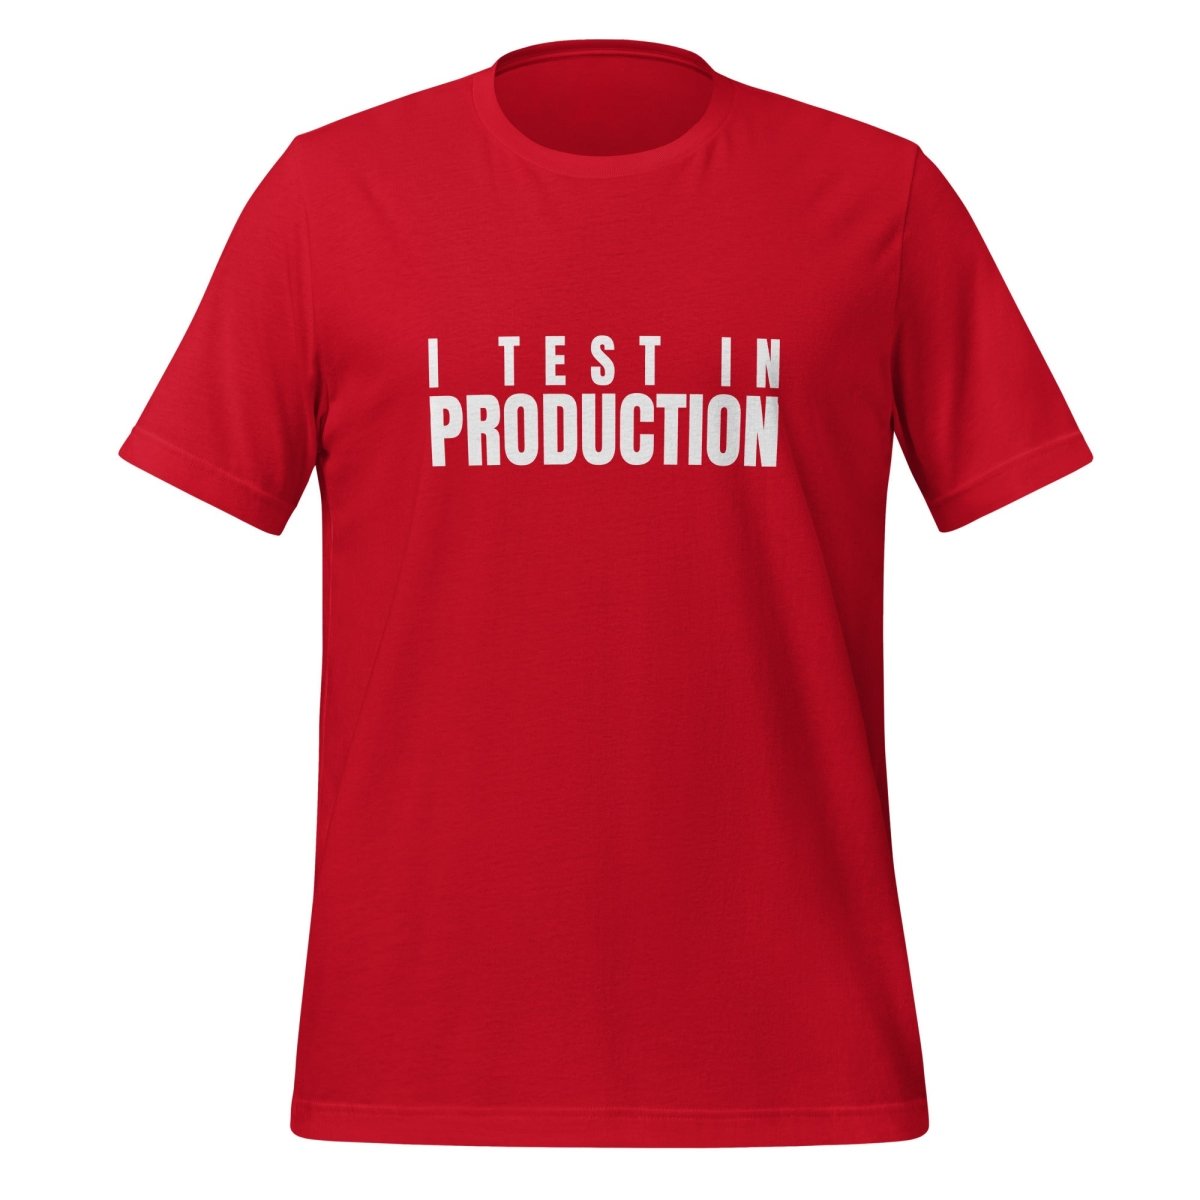 I Test in Production T - Shirt (unisex) - Red - AI Store